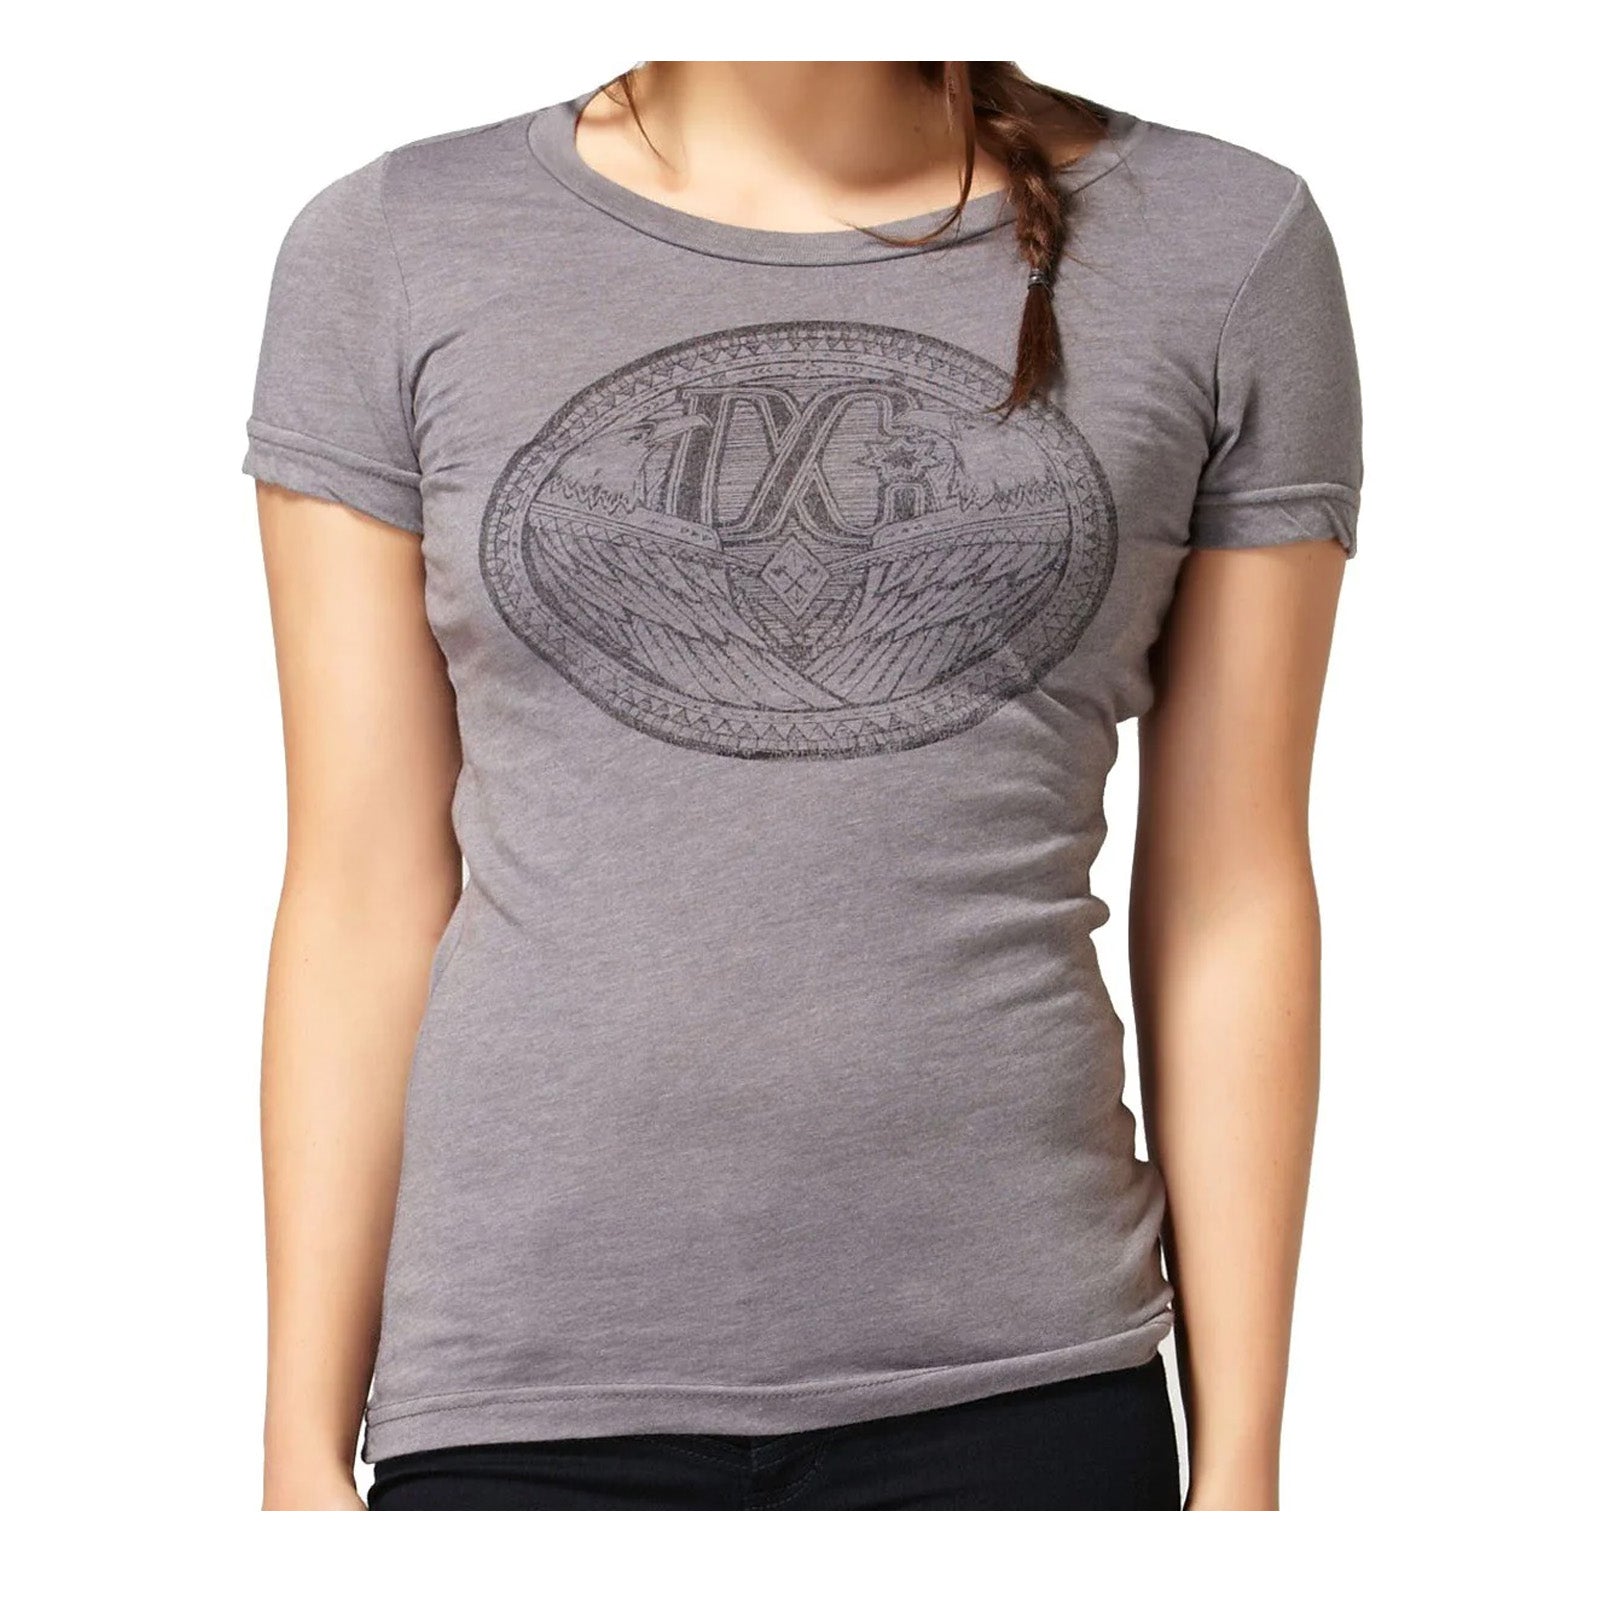 DC Montaine Women's Short-Sleeve Shirts